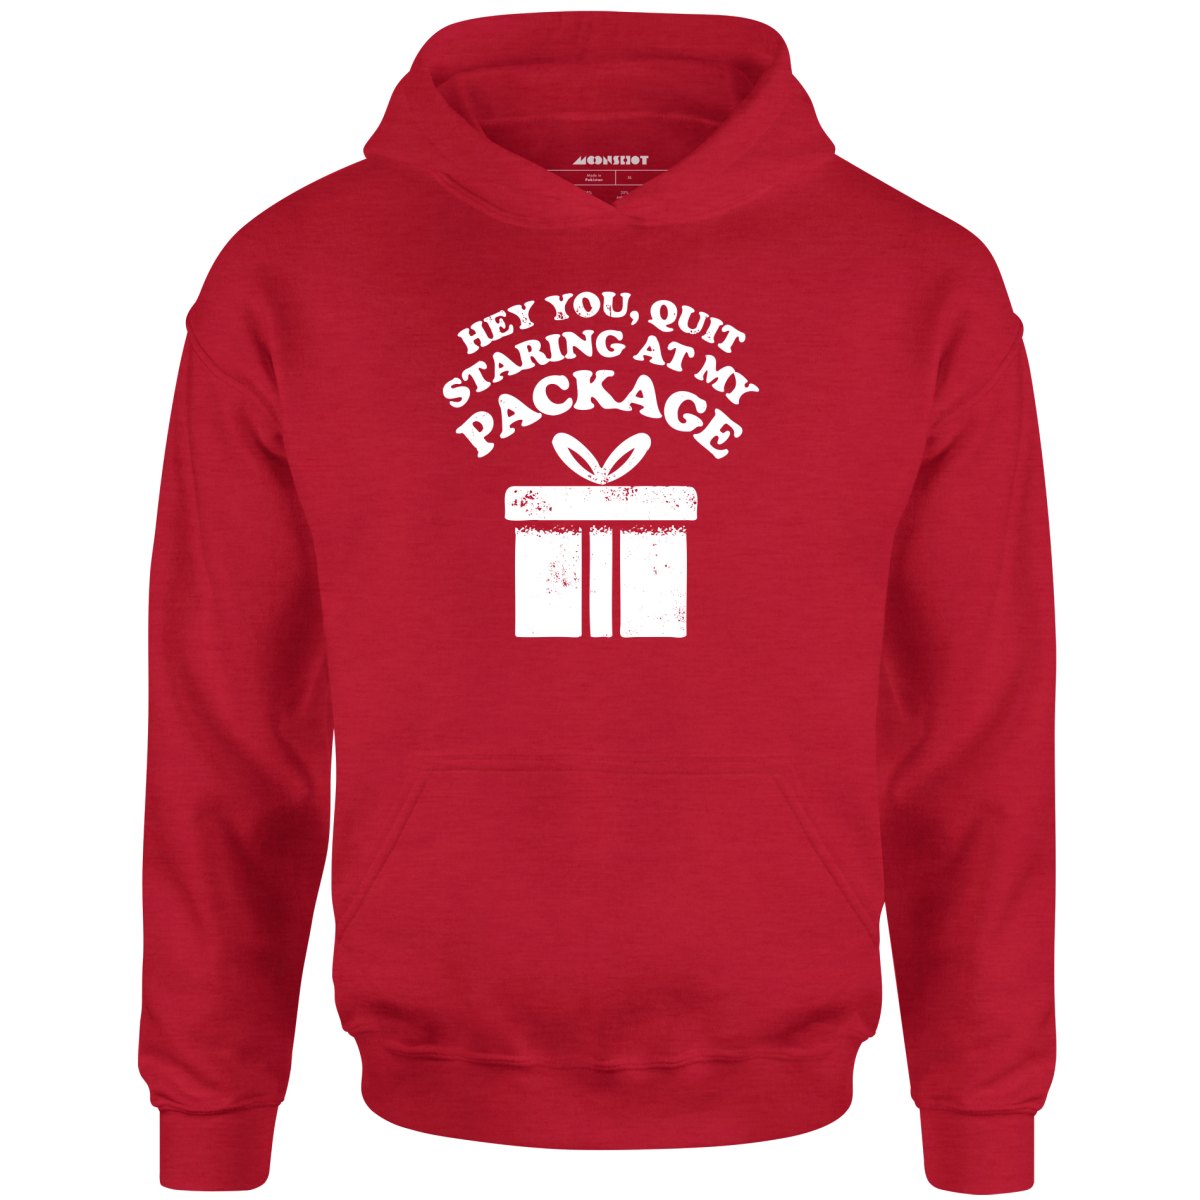 Quit Staring at My Package - Unisex Hoodie